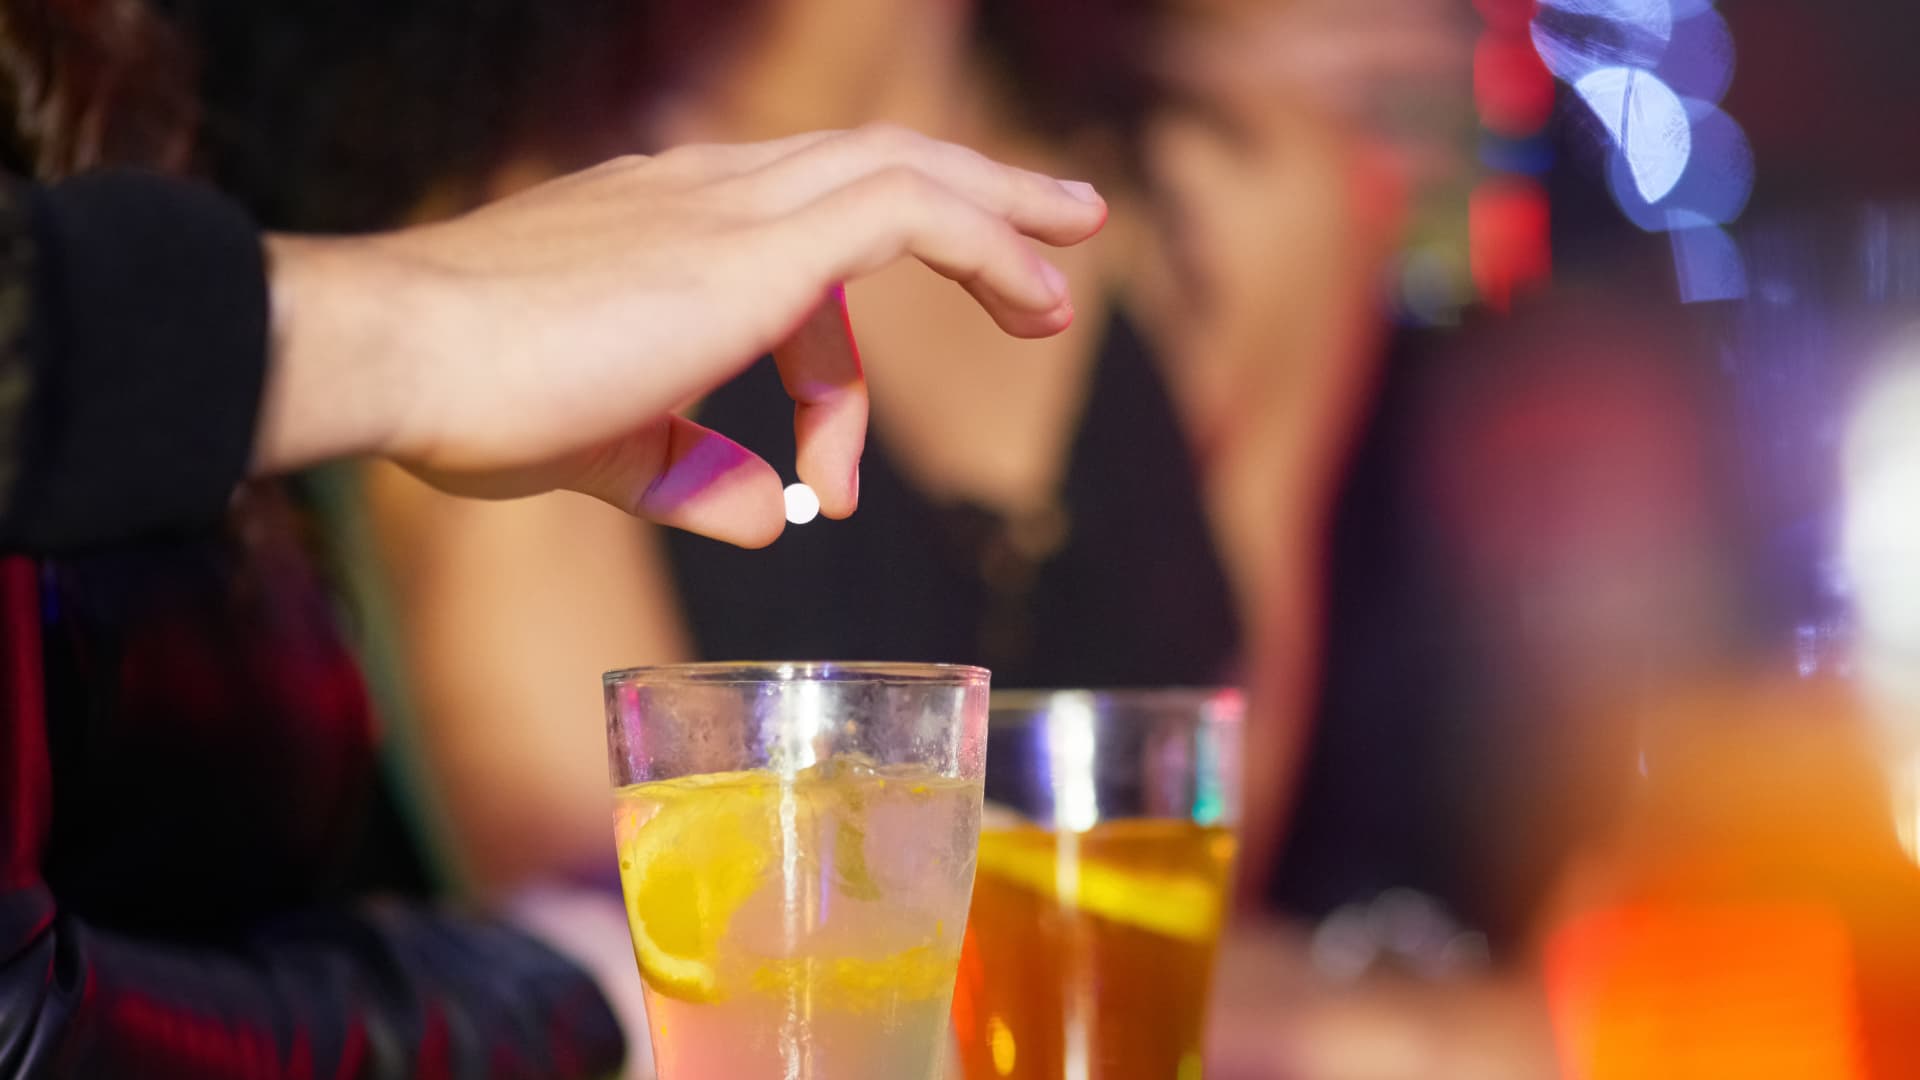 Date rape drug test allows women to discreetly check for spiked drinks